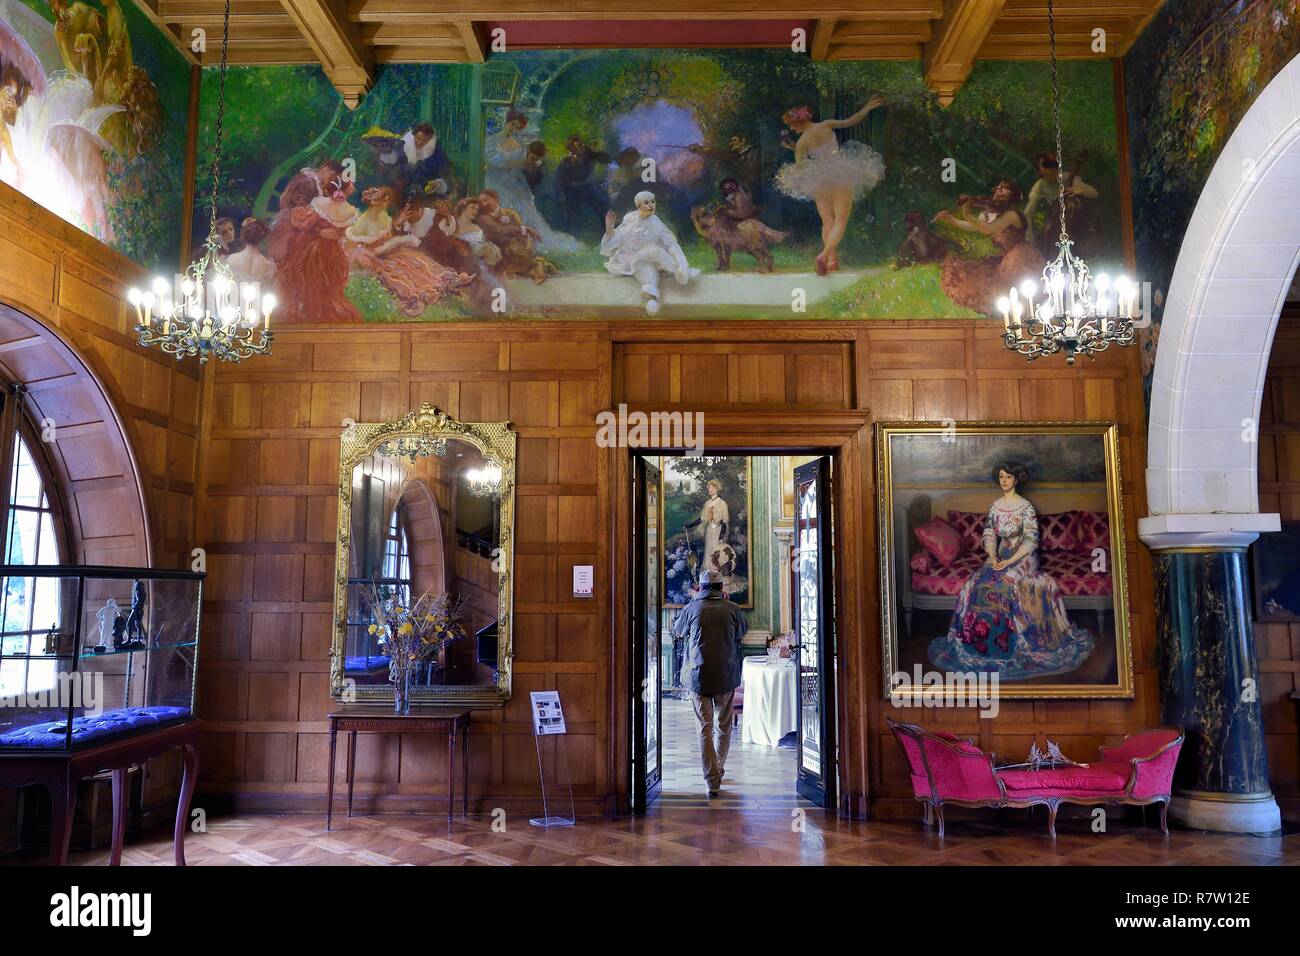 France, Pyrenees Atlantiques, Basque Country, Cambo les Bains, Villa Arnaga, the French author Edmond Rostand's house and museum, the Great Hall Stock Photo